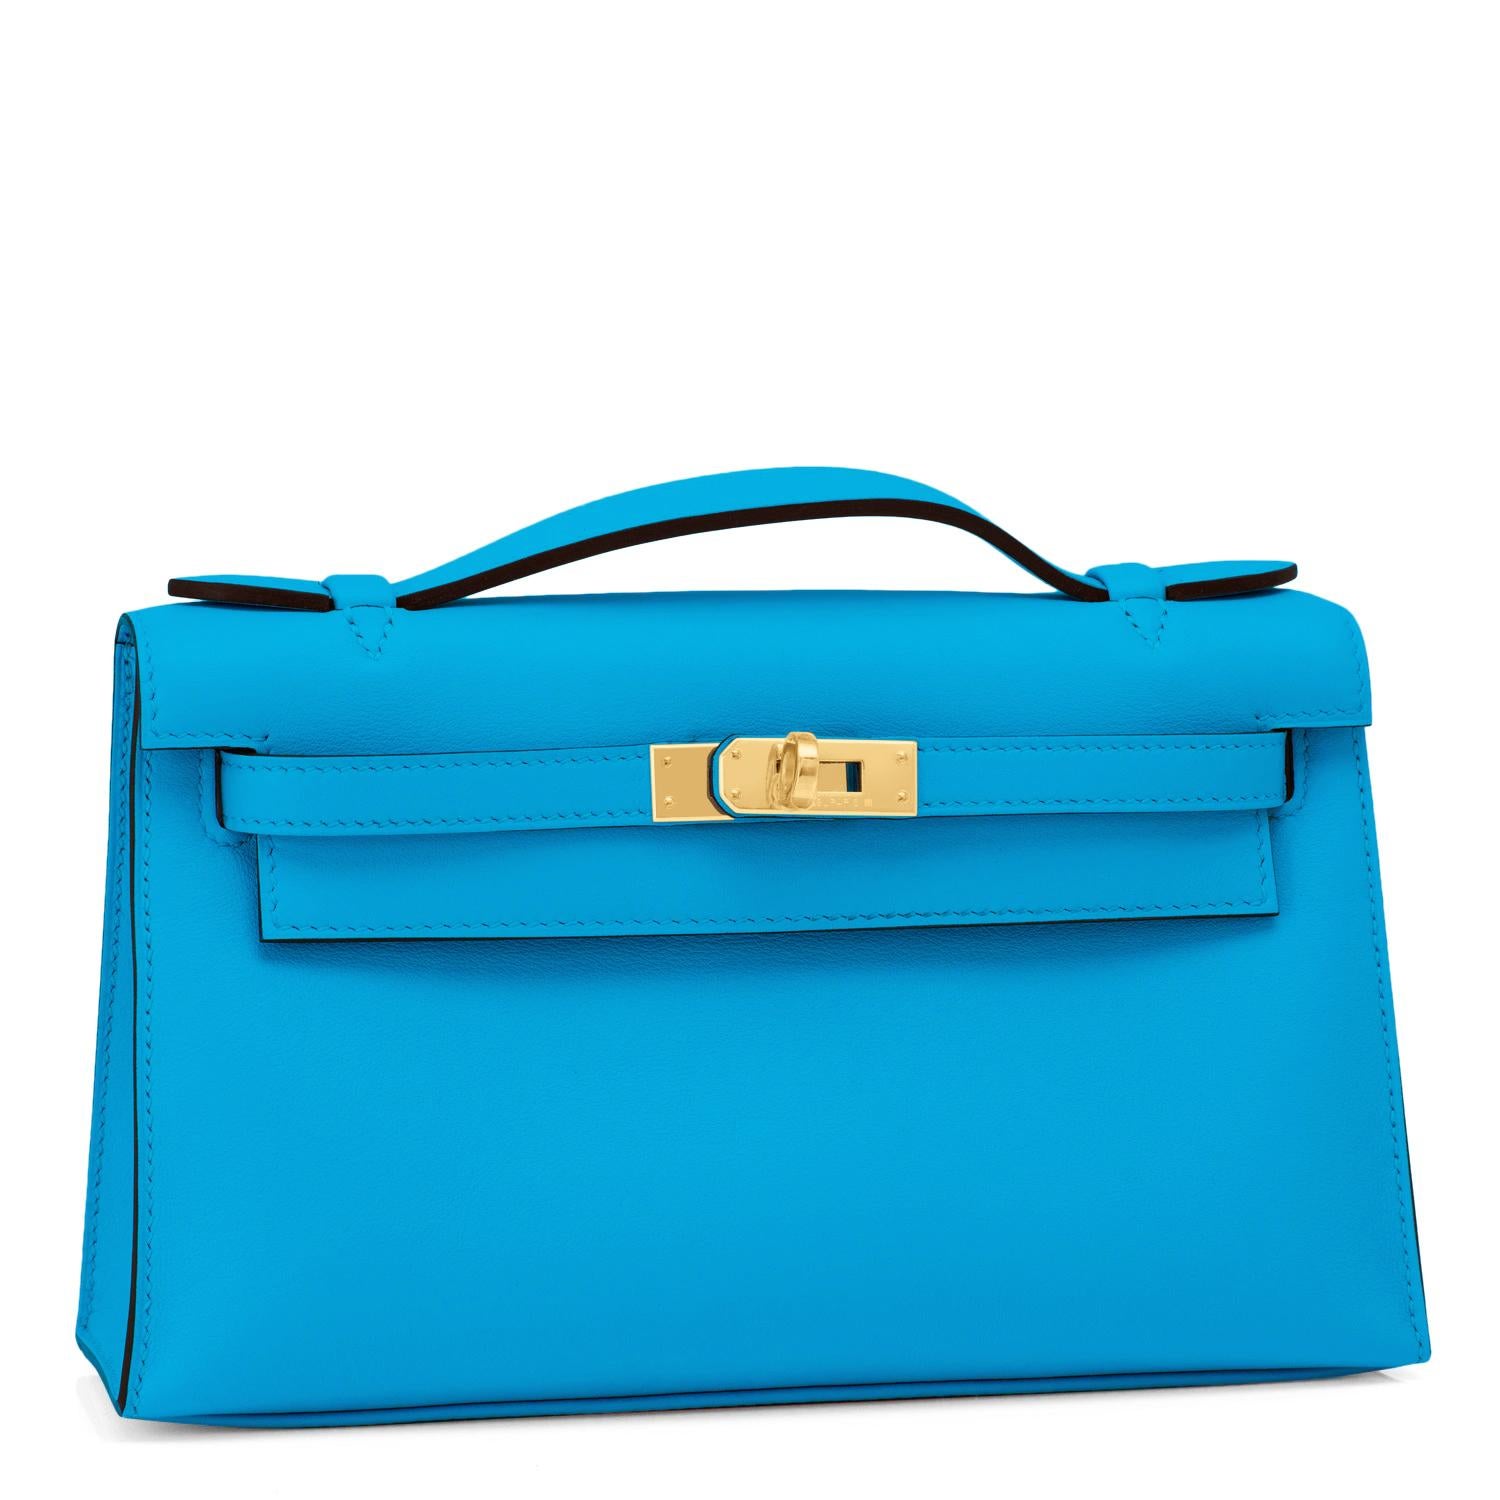 Hermes Kelly Pochette Blue Frida Gold Hardware Clutch Cut Bag Y Stamp, 2020
Blue Frida is a brand new and spectacularly gorgeous blue color from Hermes!
Just purchased from Hermes store; bag bears new 2020 interior Y Stamp.
Brand New in Box. Store